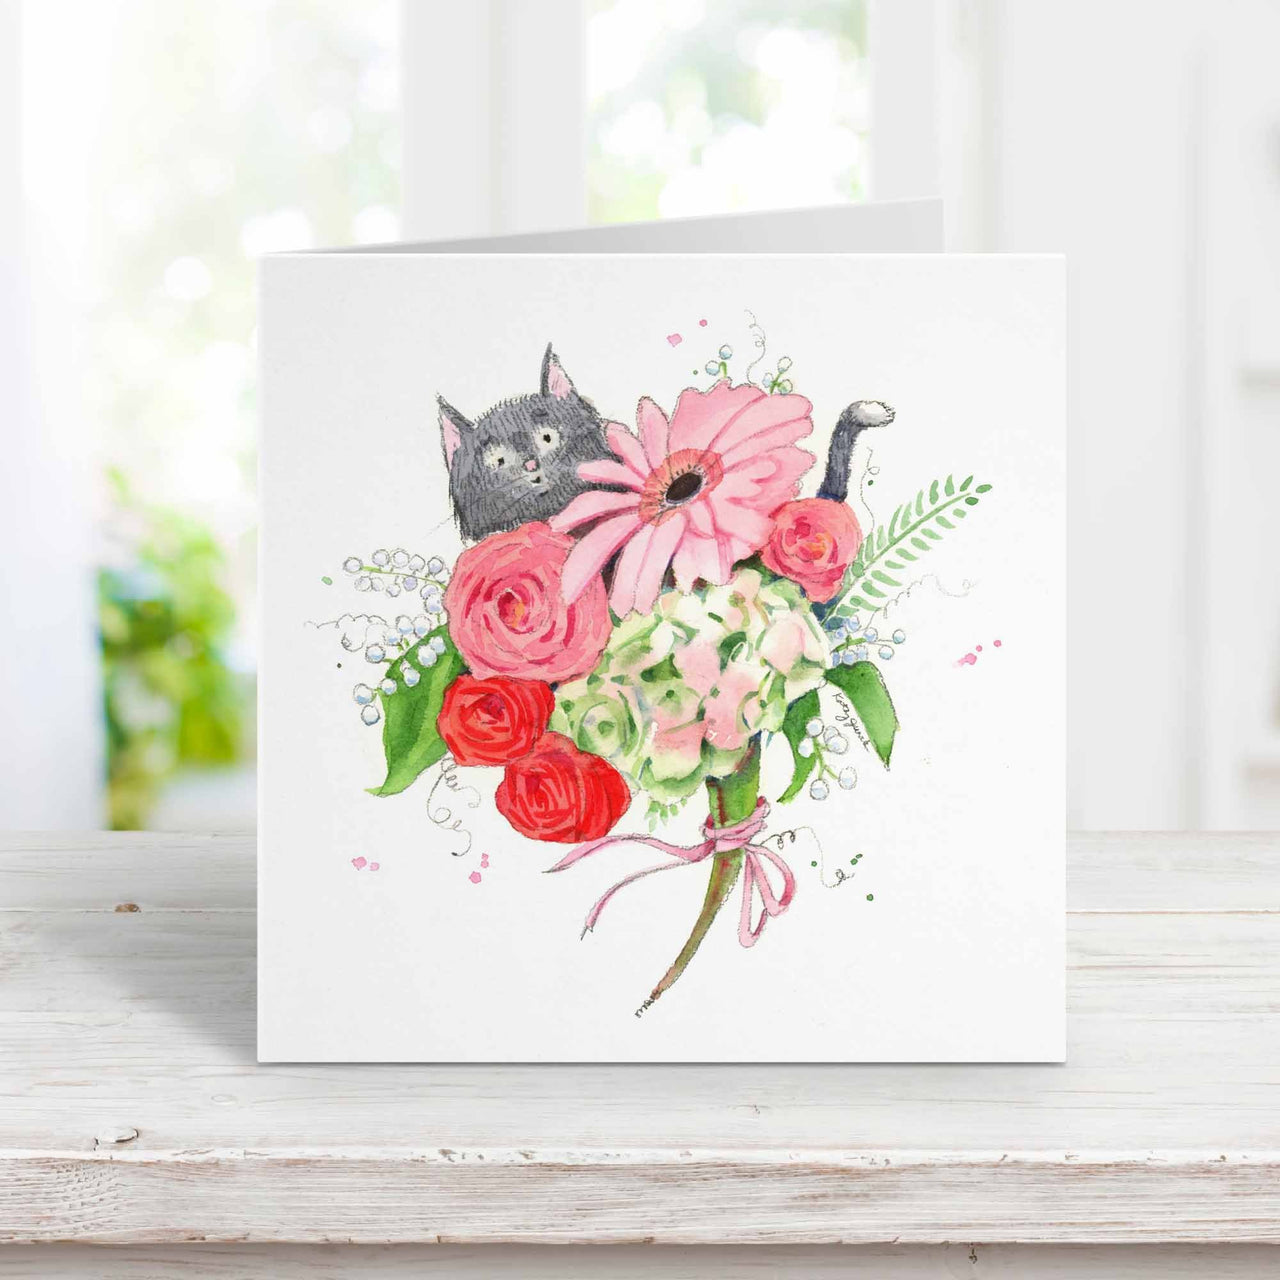 gray cat with flowers card for her birthday